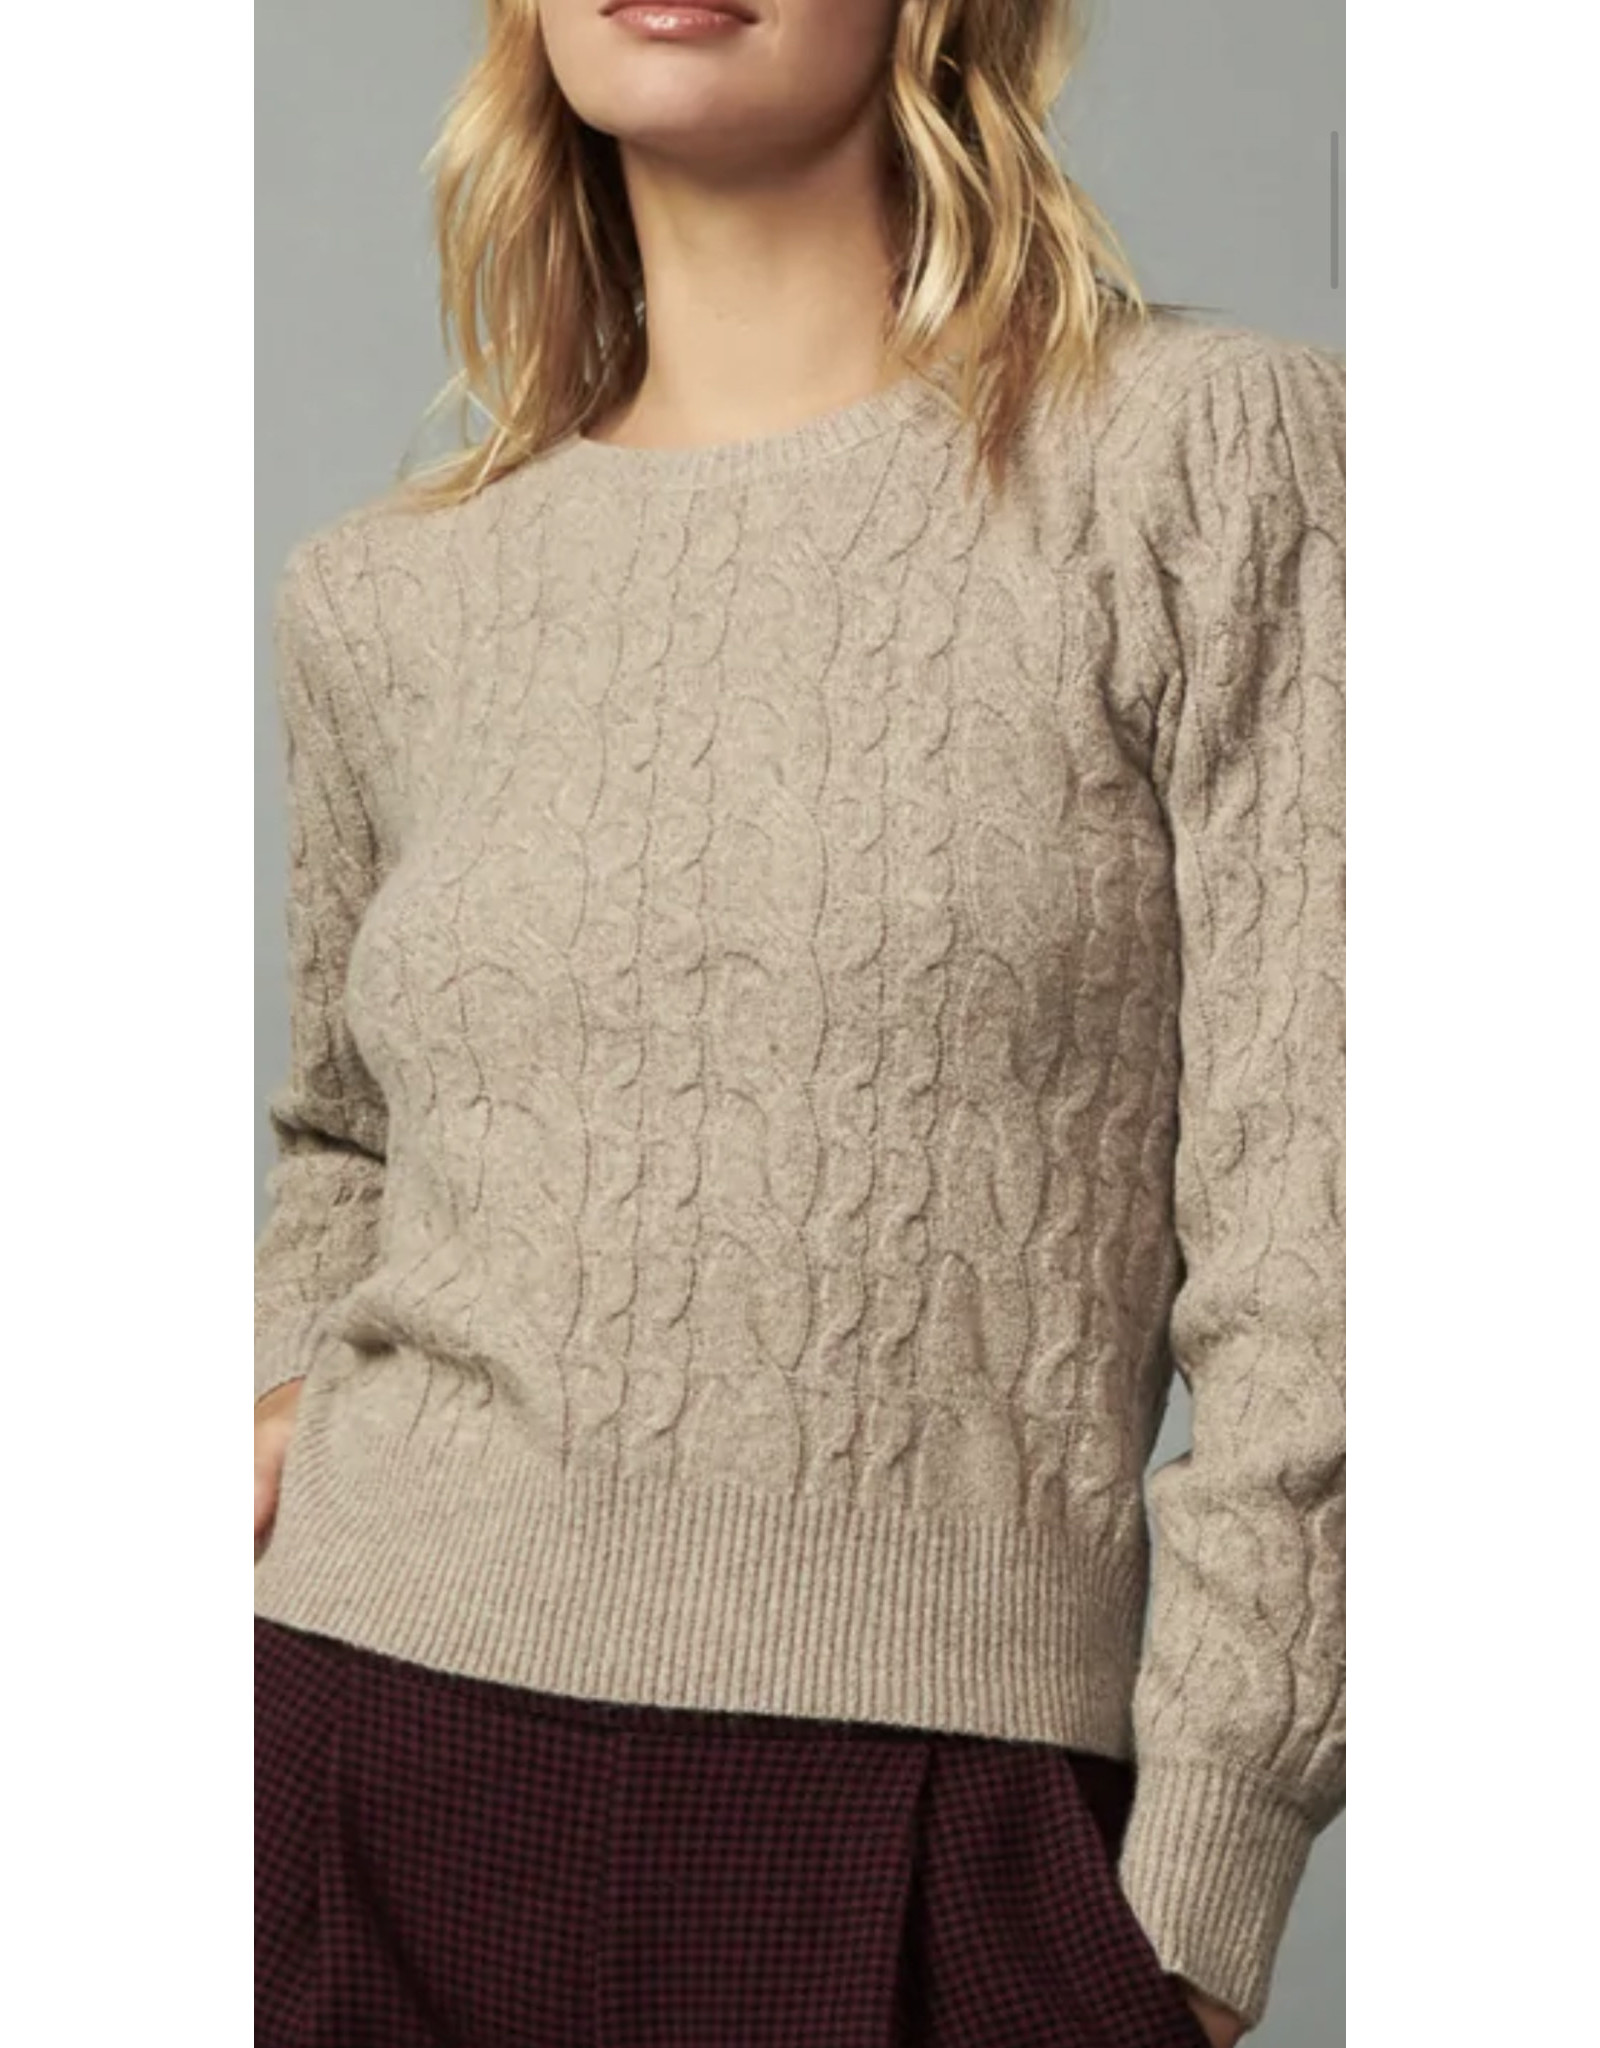 PUFF SLV CABLE KNIT SWEATER